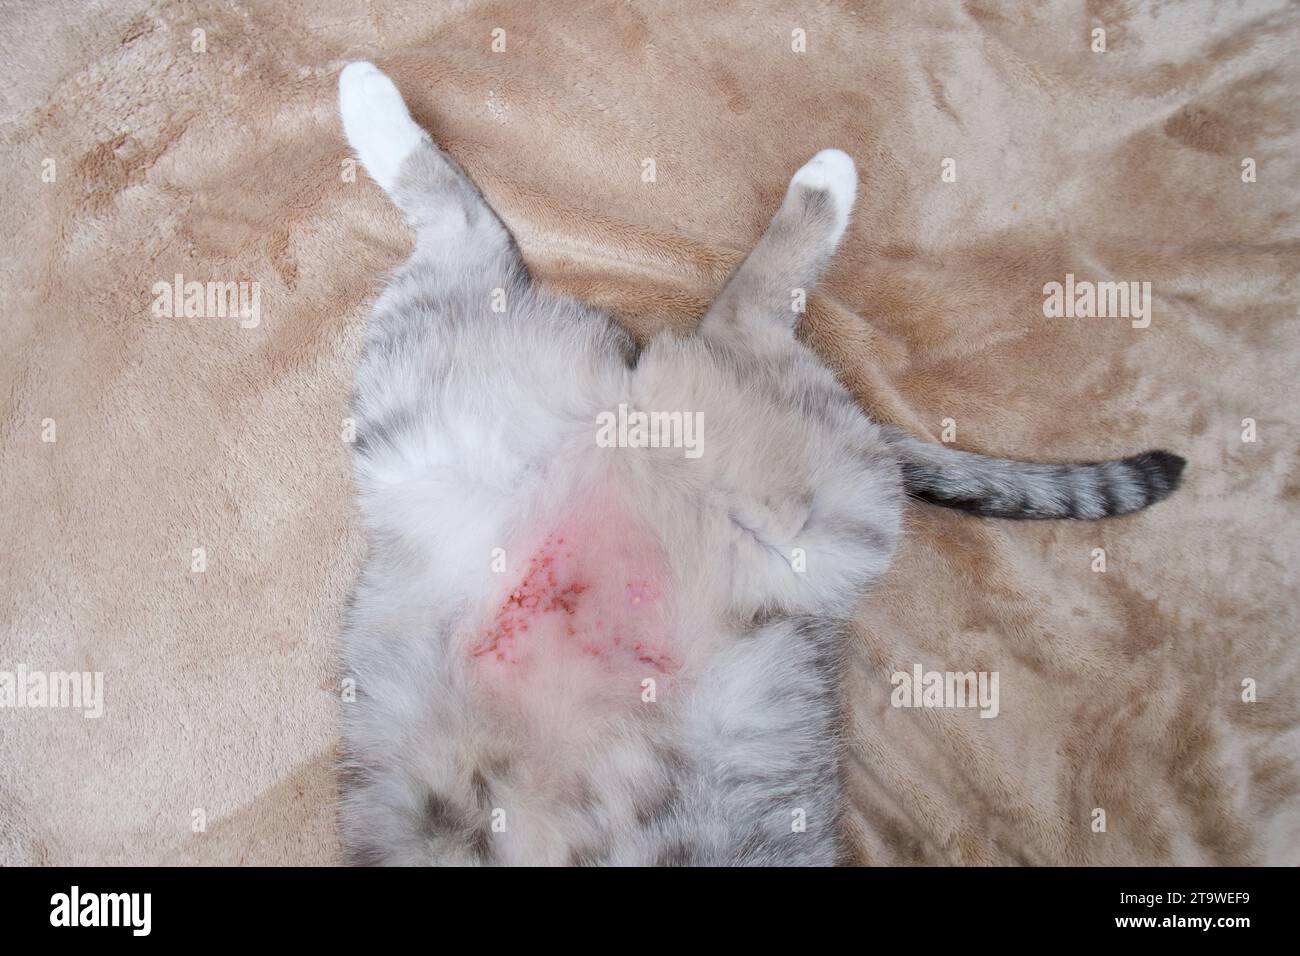 The cat scratched his stomach from itchy skin to scratches and wounds. The belly of a cat with wounds and skin problems from stress or allergies Stock Photo